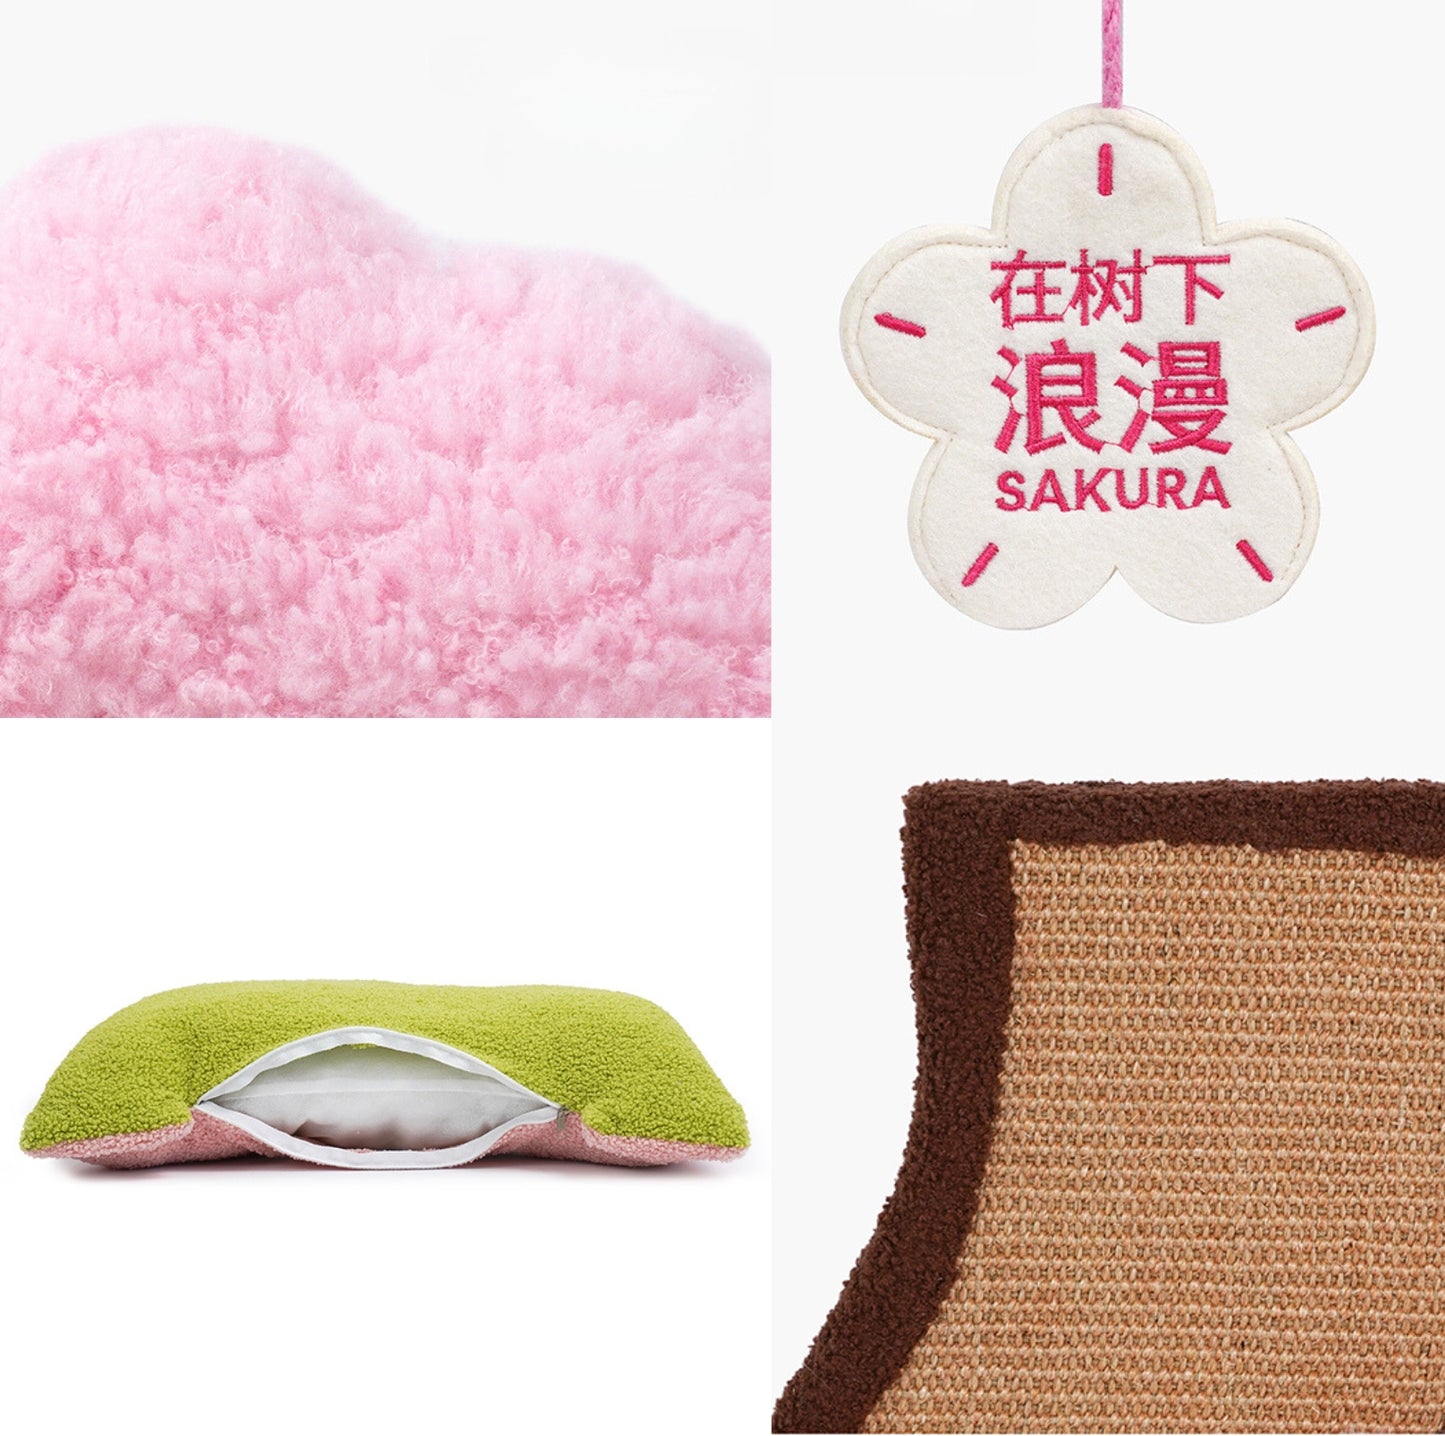 ZeZe Cherry Blossom Multifunctional Cat Bed with Sisal Scratcher and Catnip Toy